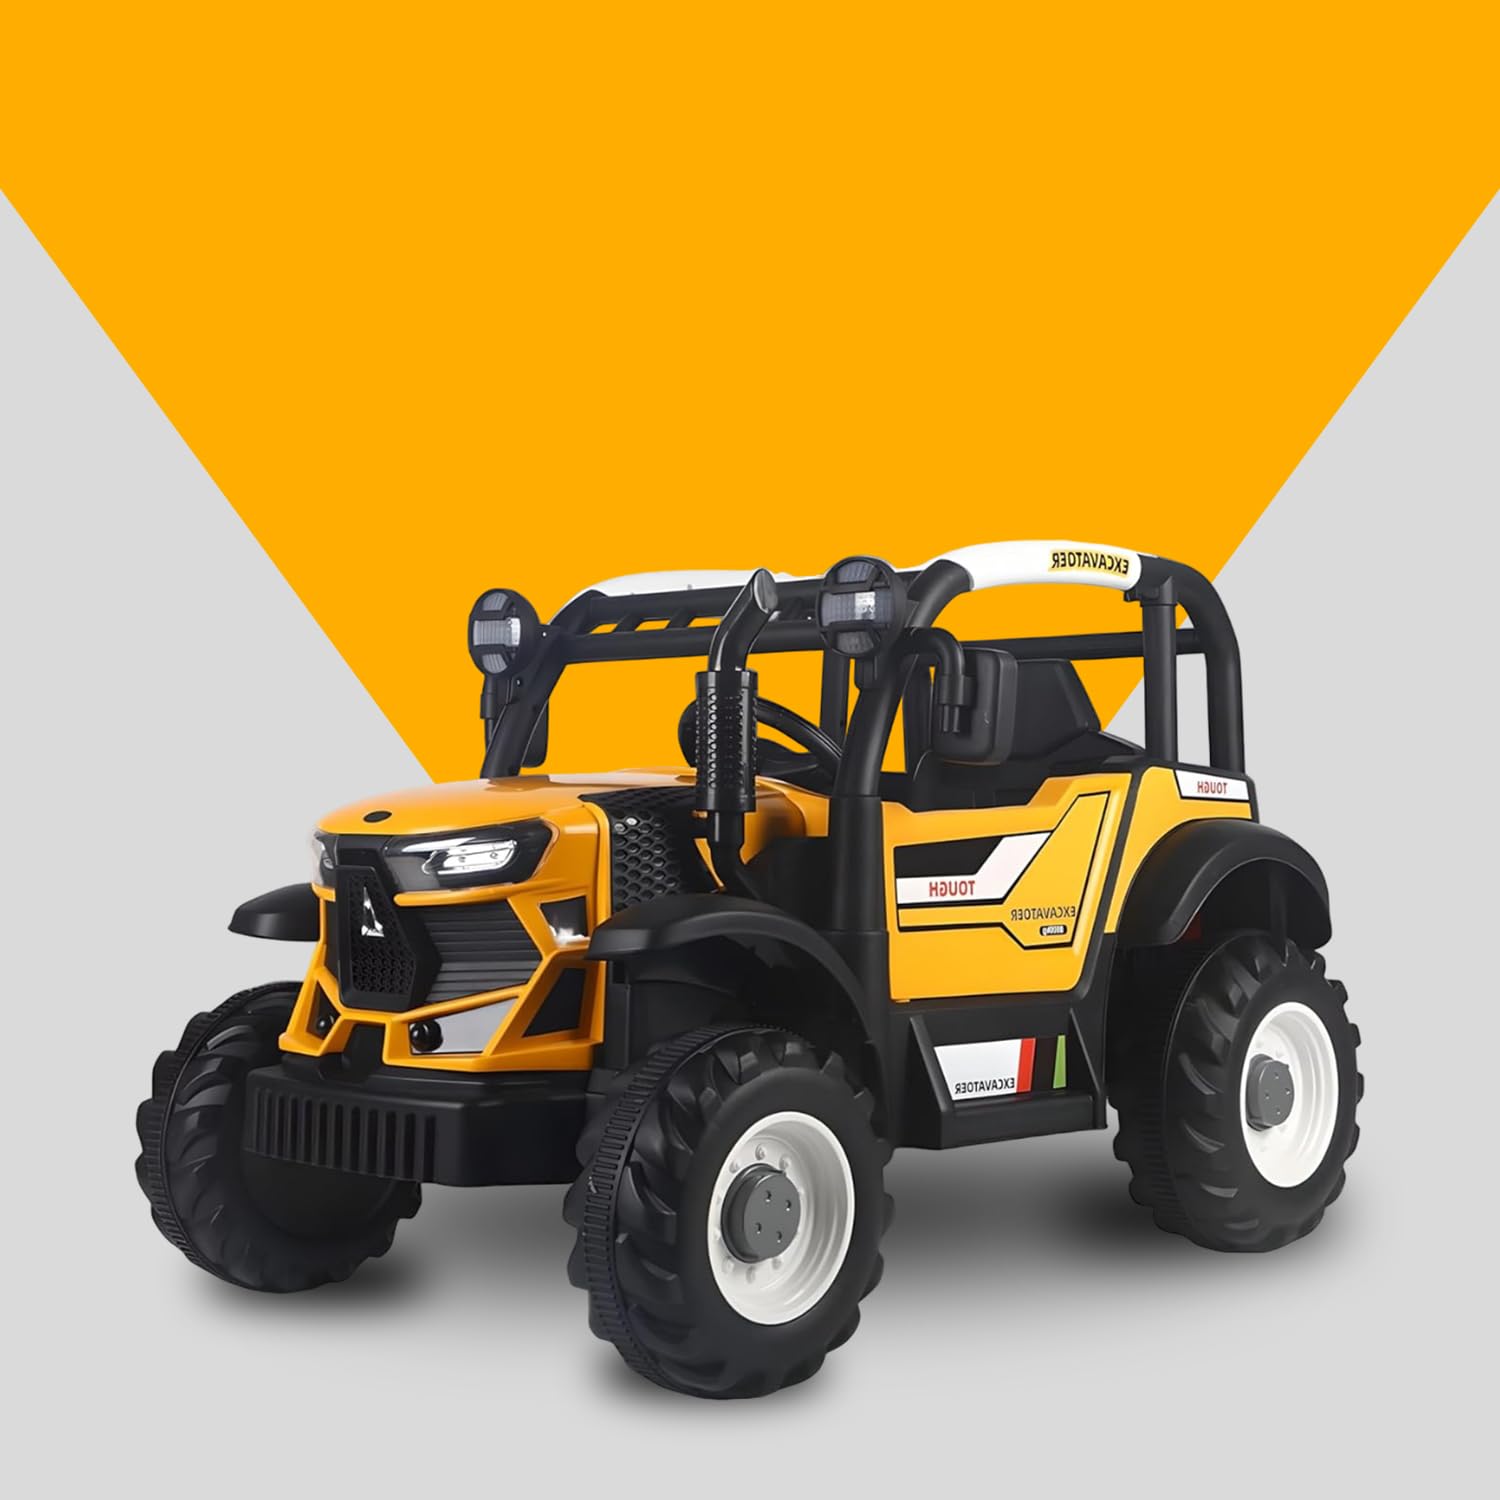 PATOYS | Kids Electric Ride-On Premium Tractor with Dual Control, Realistic Design, Music, Safe Driving excavator for Boys and Girls - (Ages 2-8) - Yellow - PATOYS